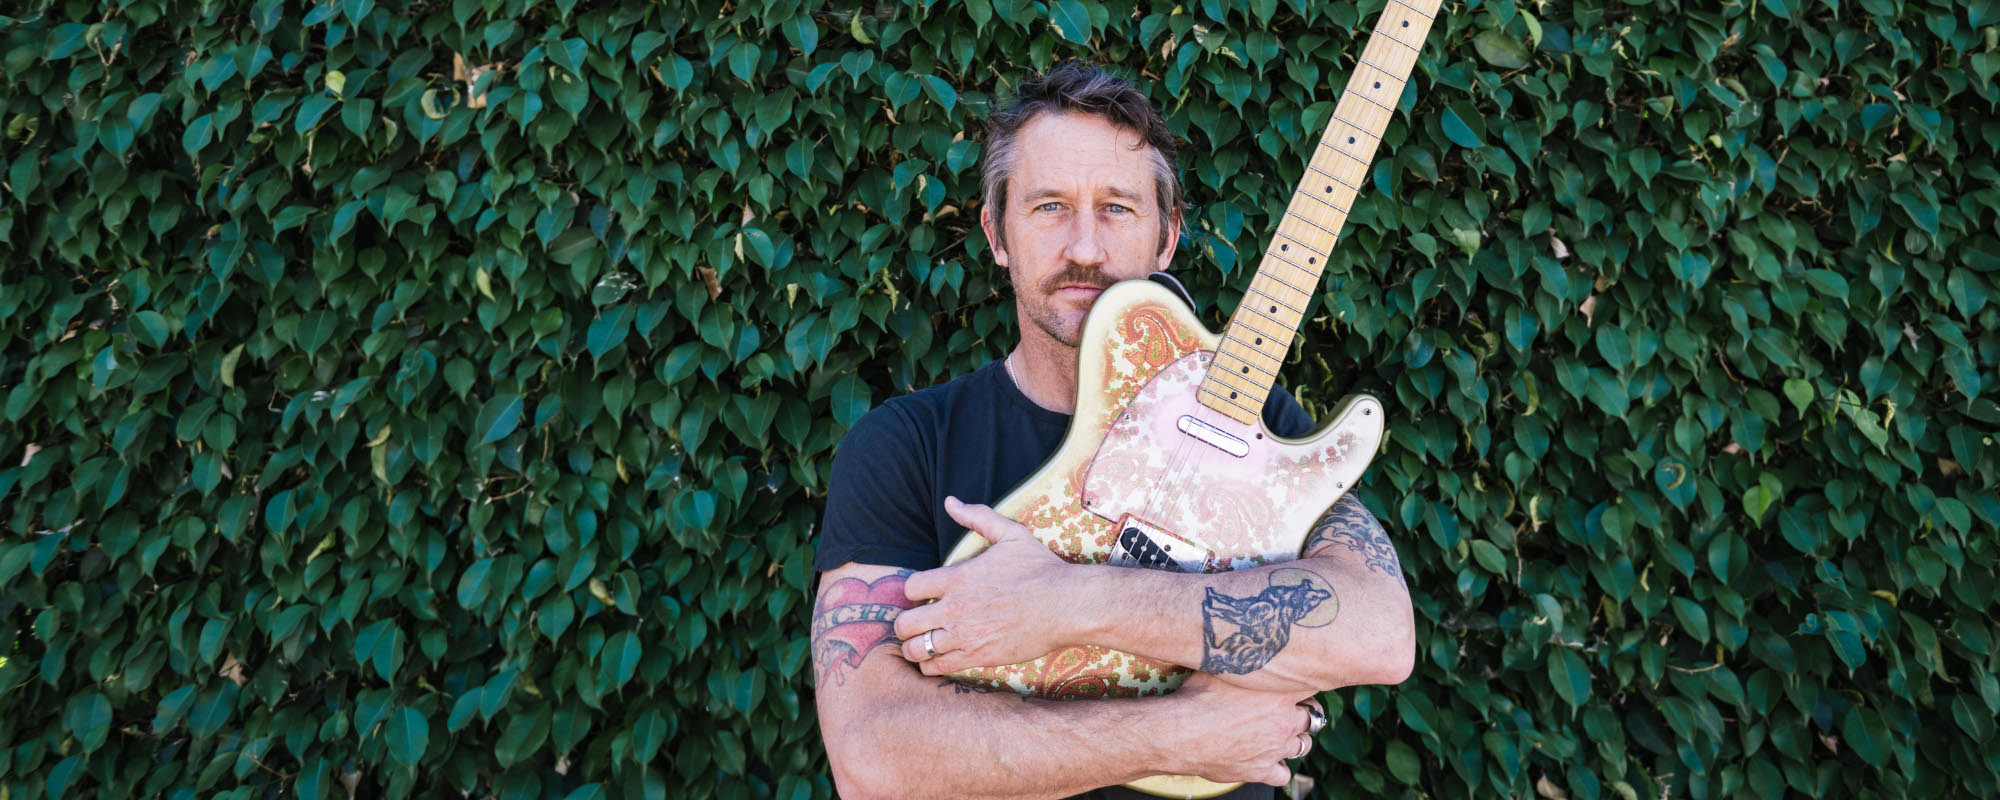 Chris Shiflett  Continues to Evolve with Solo Album ‘Lost at Sea’—“Making This Record was Really Different Than Any Other Record I’ve Made”